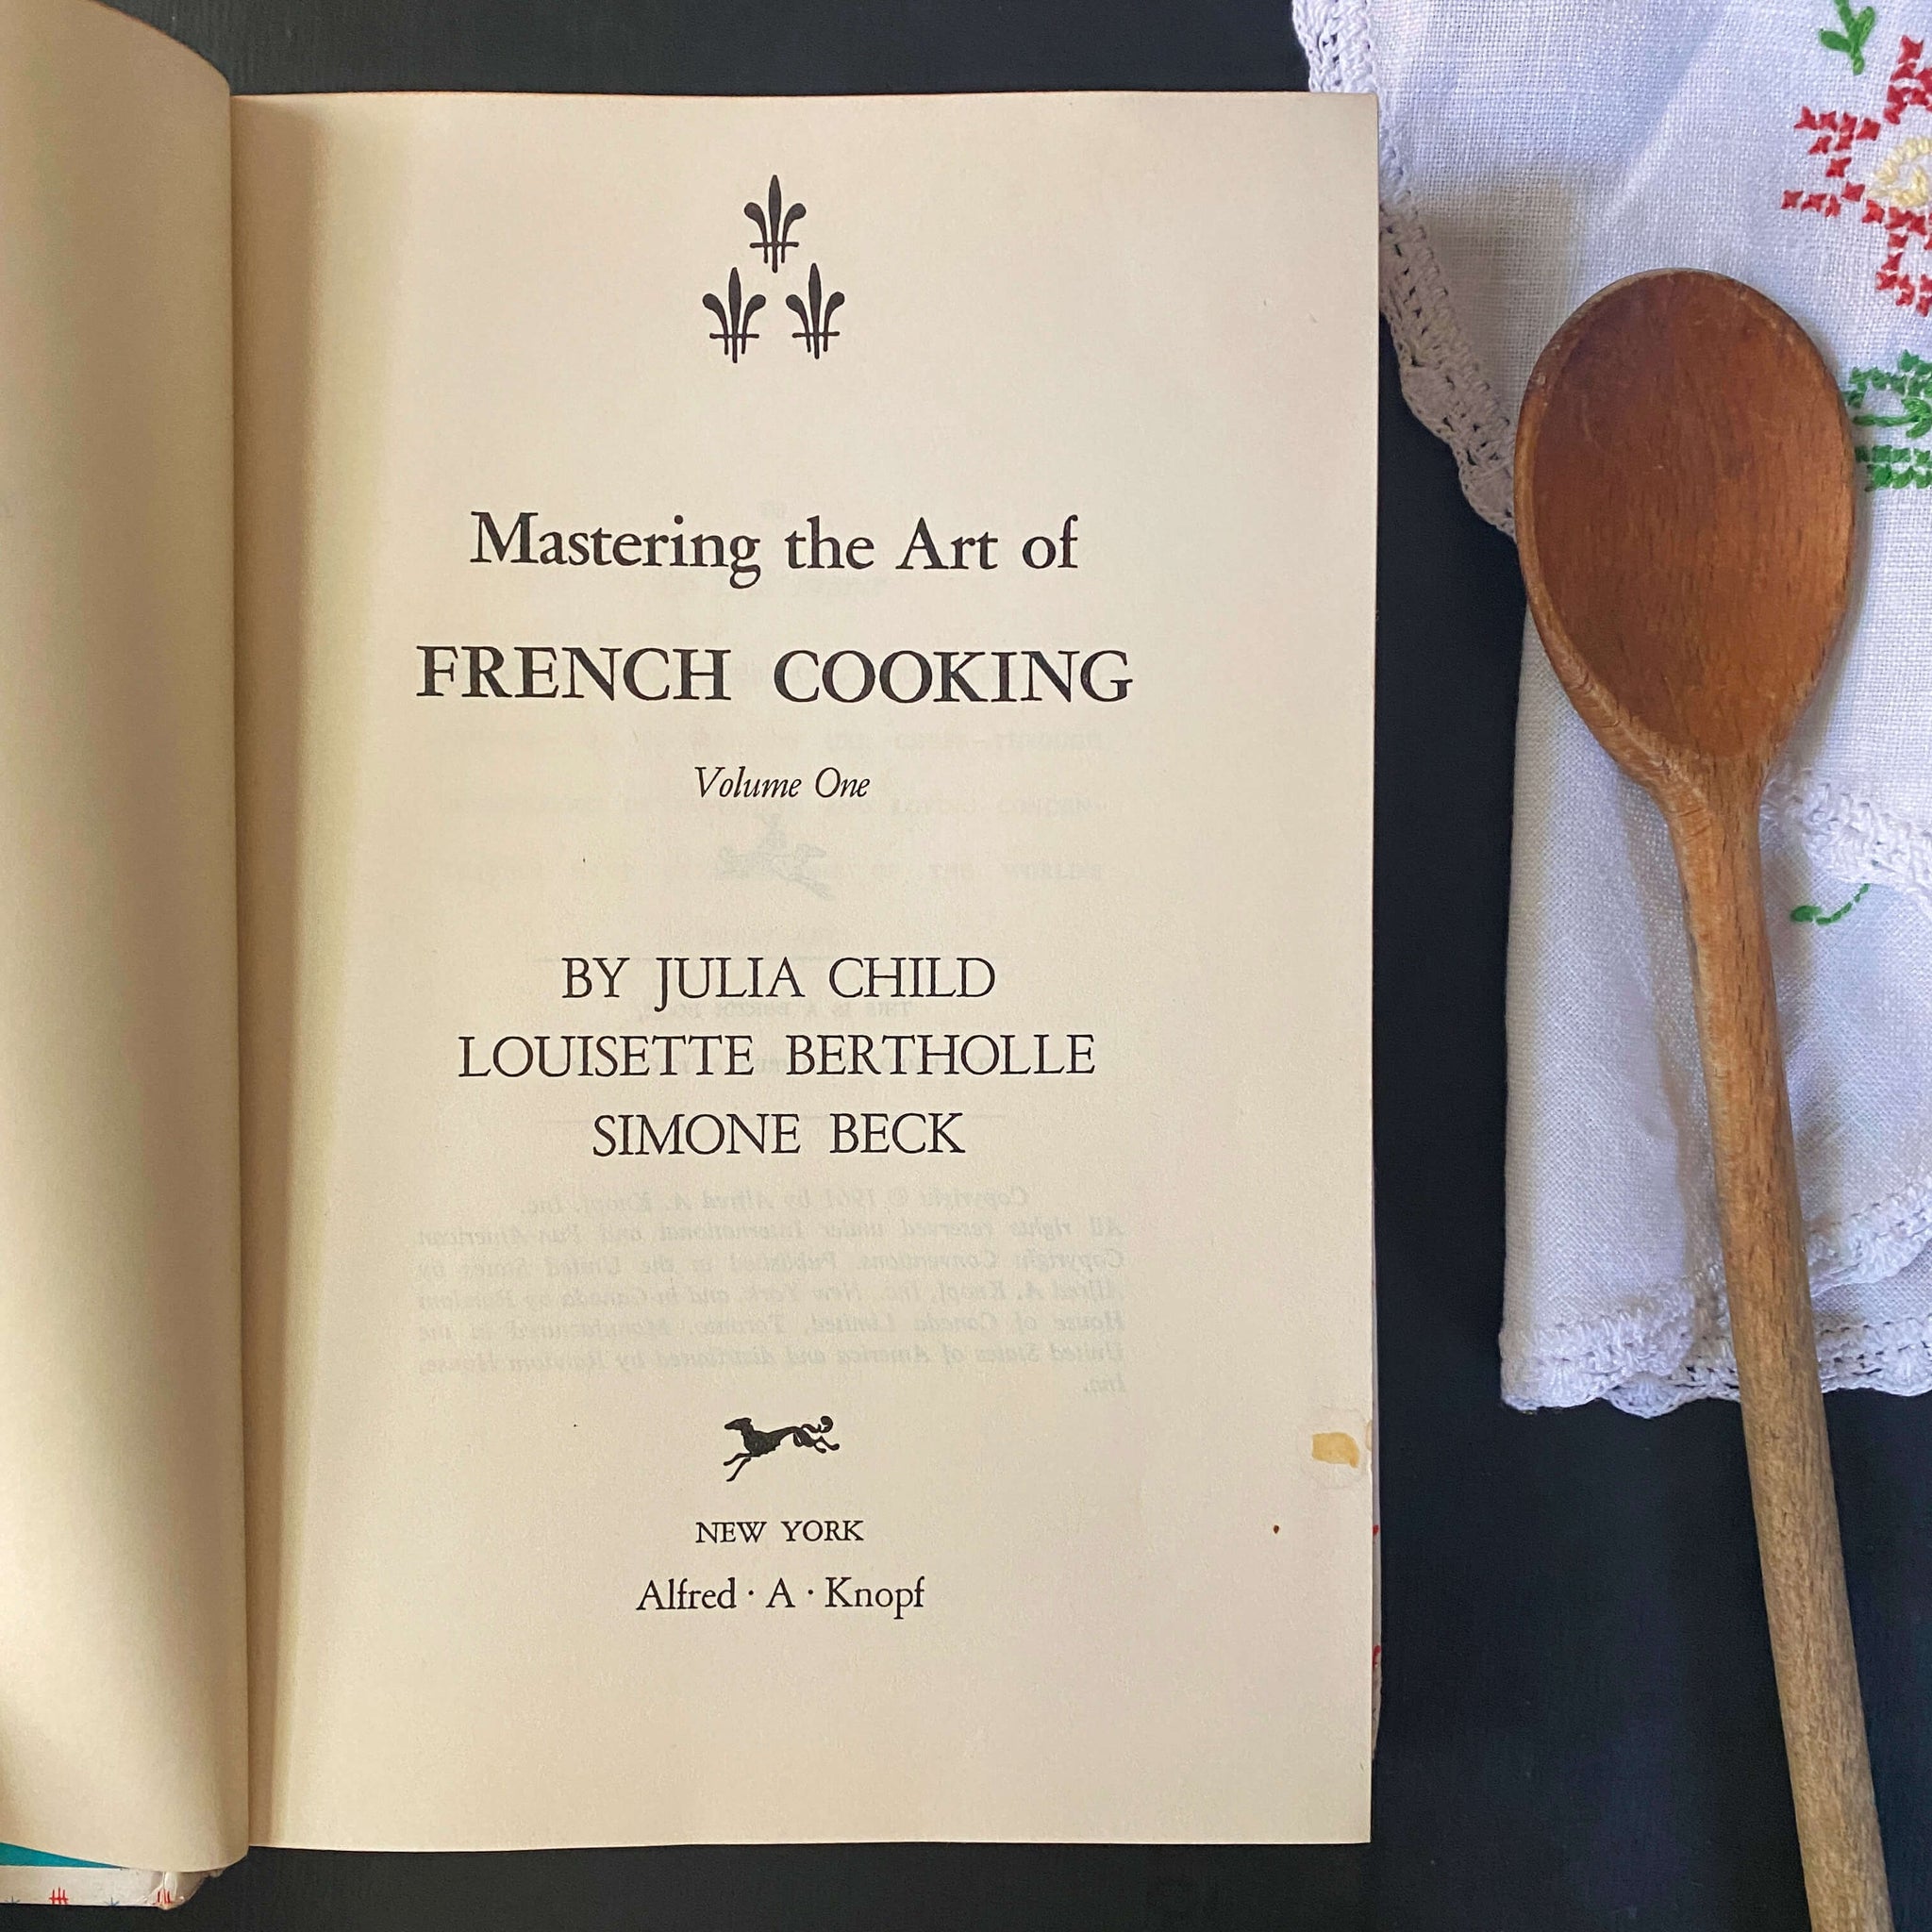 Mastering The Art Of French Cooking by Julia Child Louisette Berthole and Simone Beck - Volume One circa Early 1970s